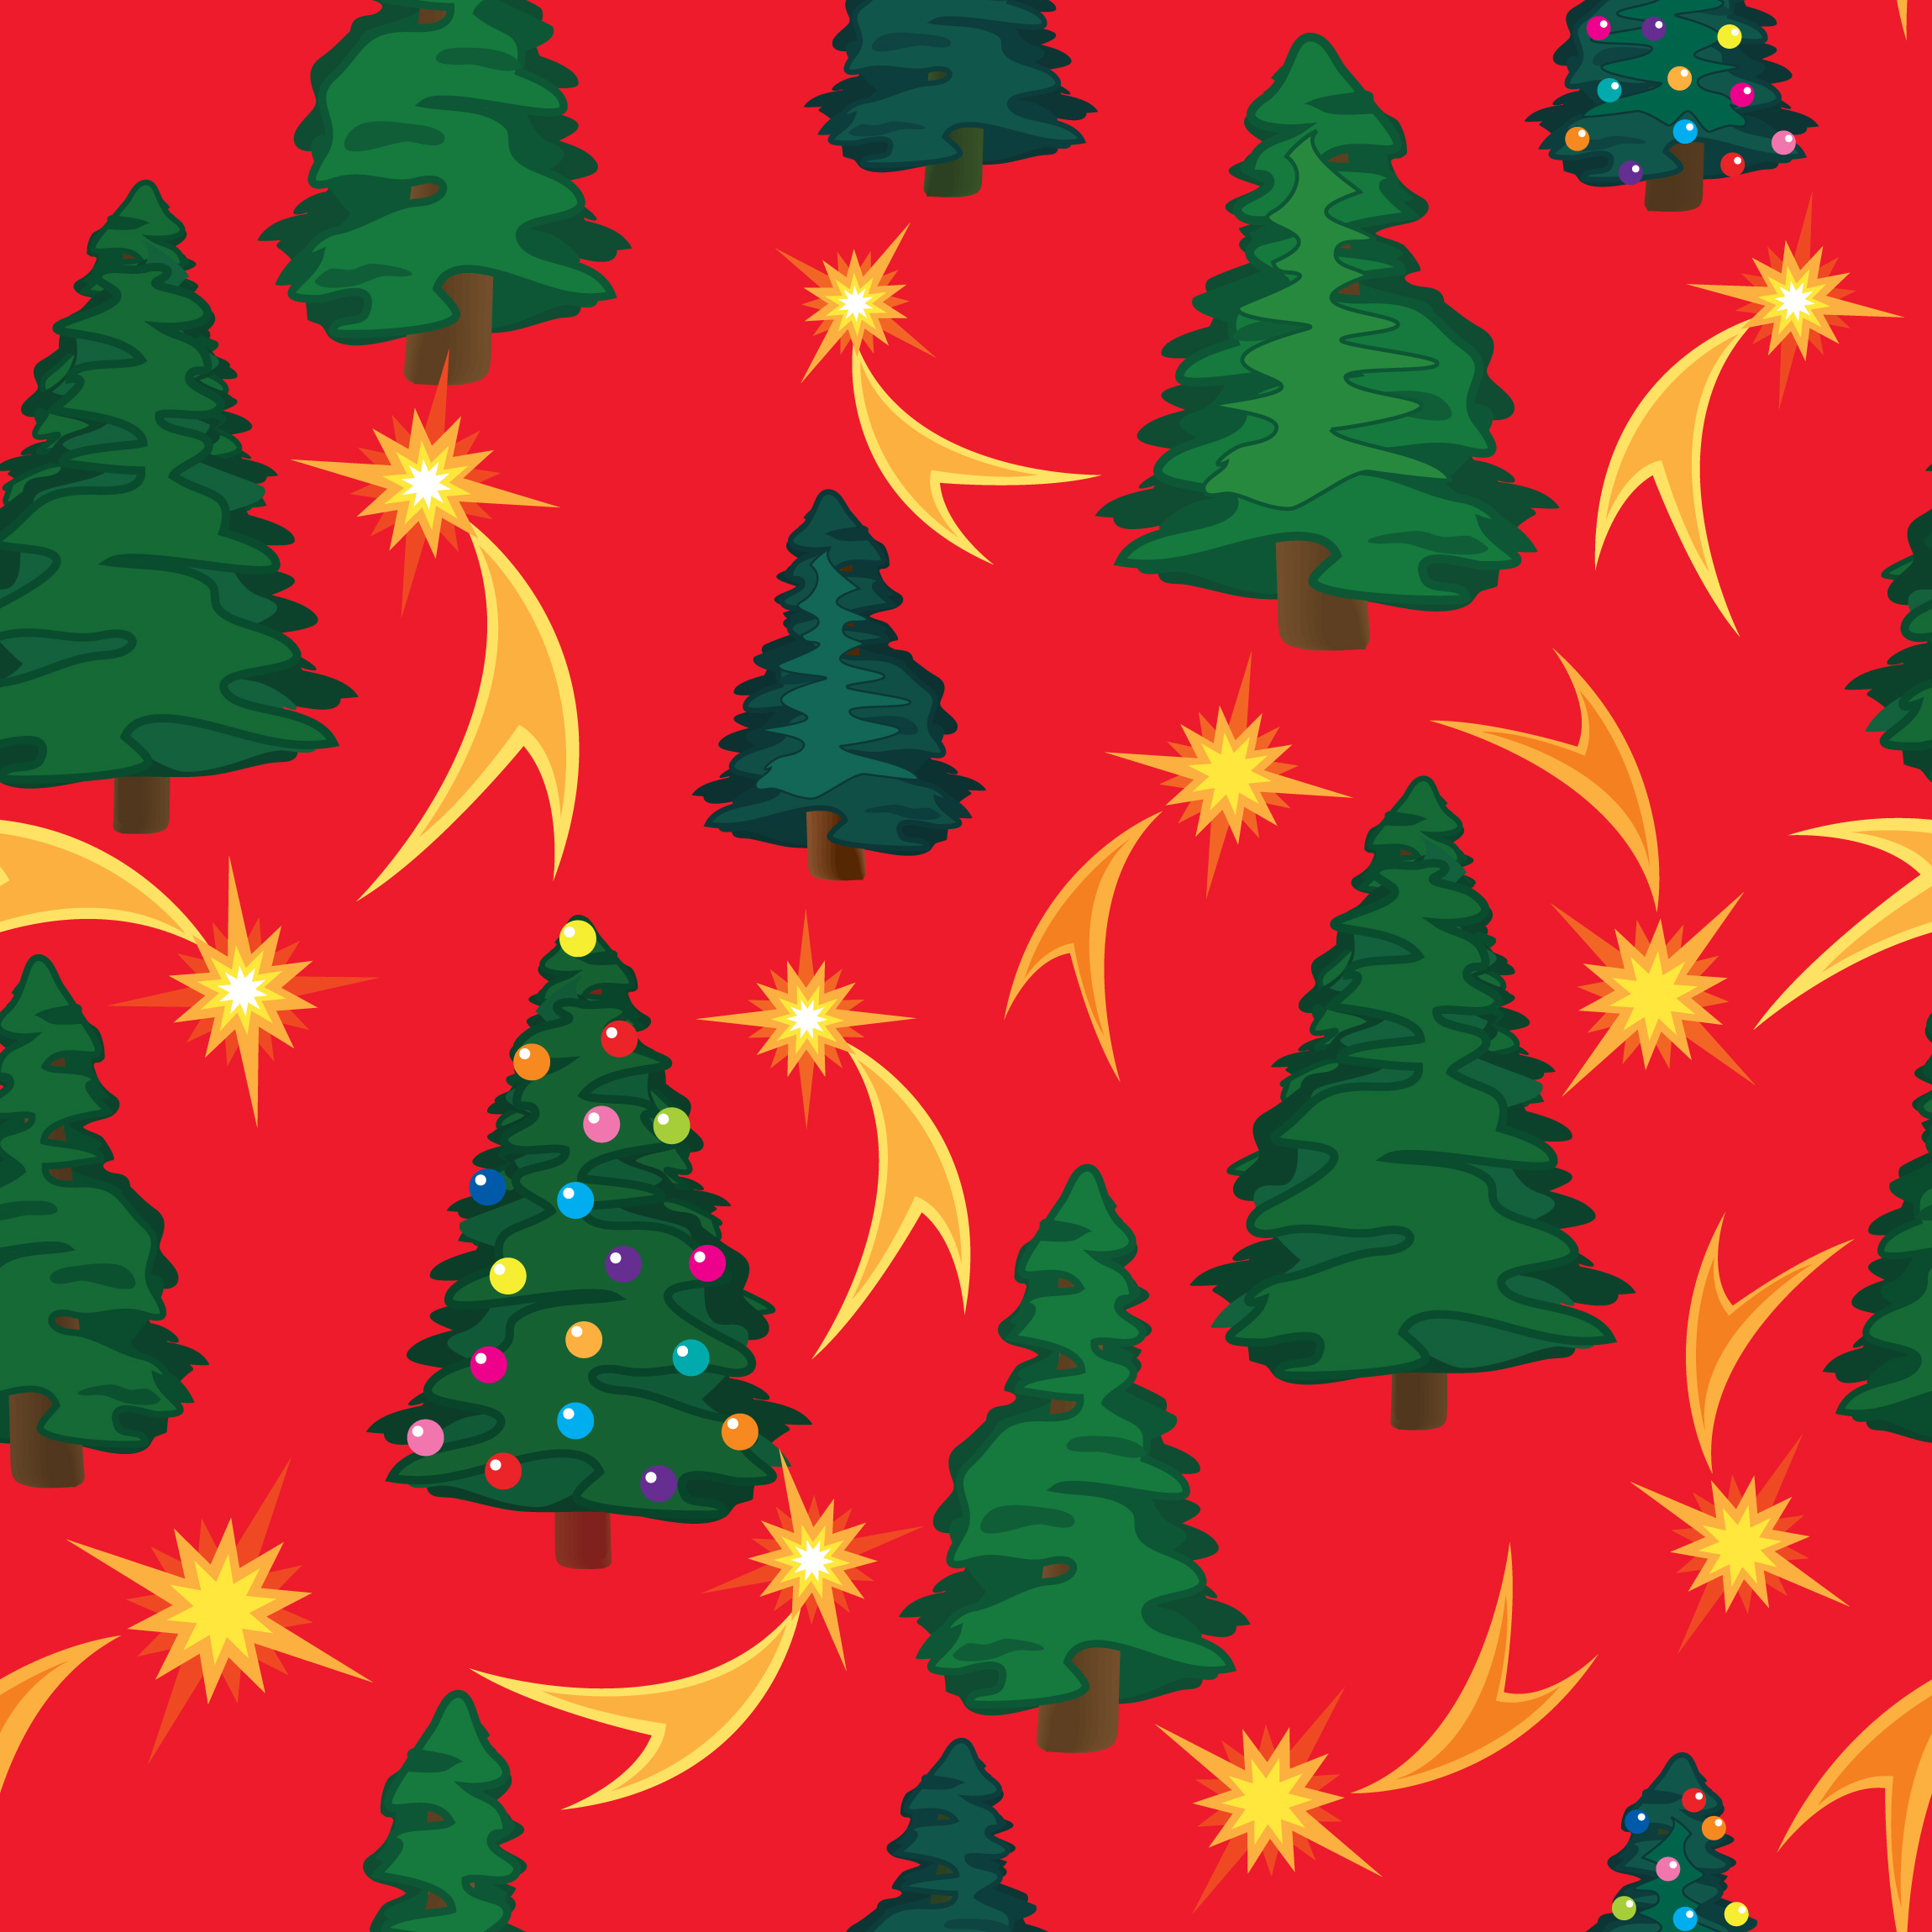 Download Christmas tree seamless pattern. Winter holiday floral ...